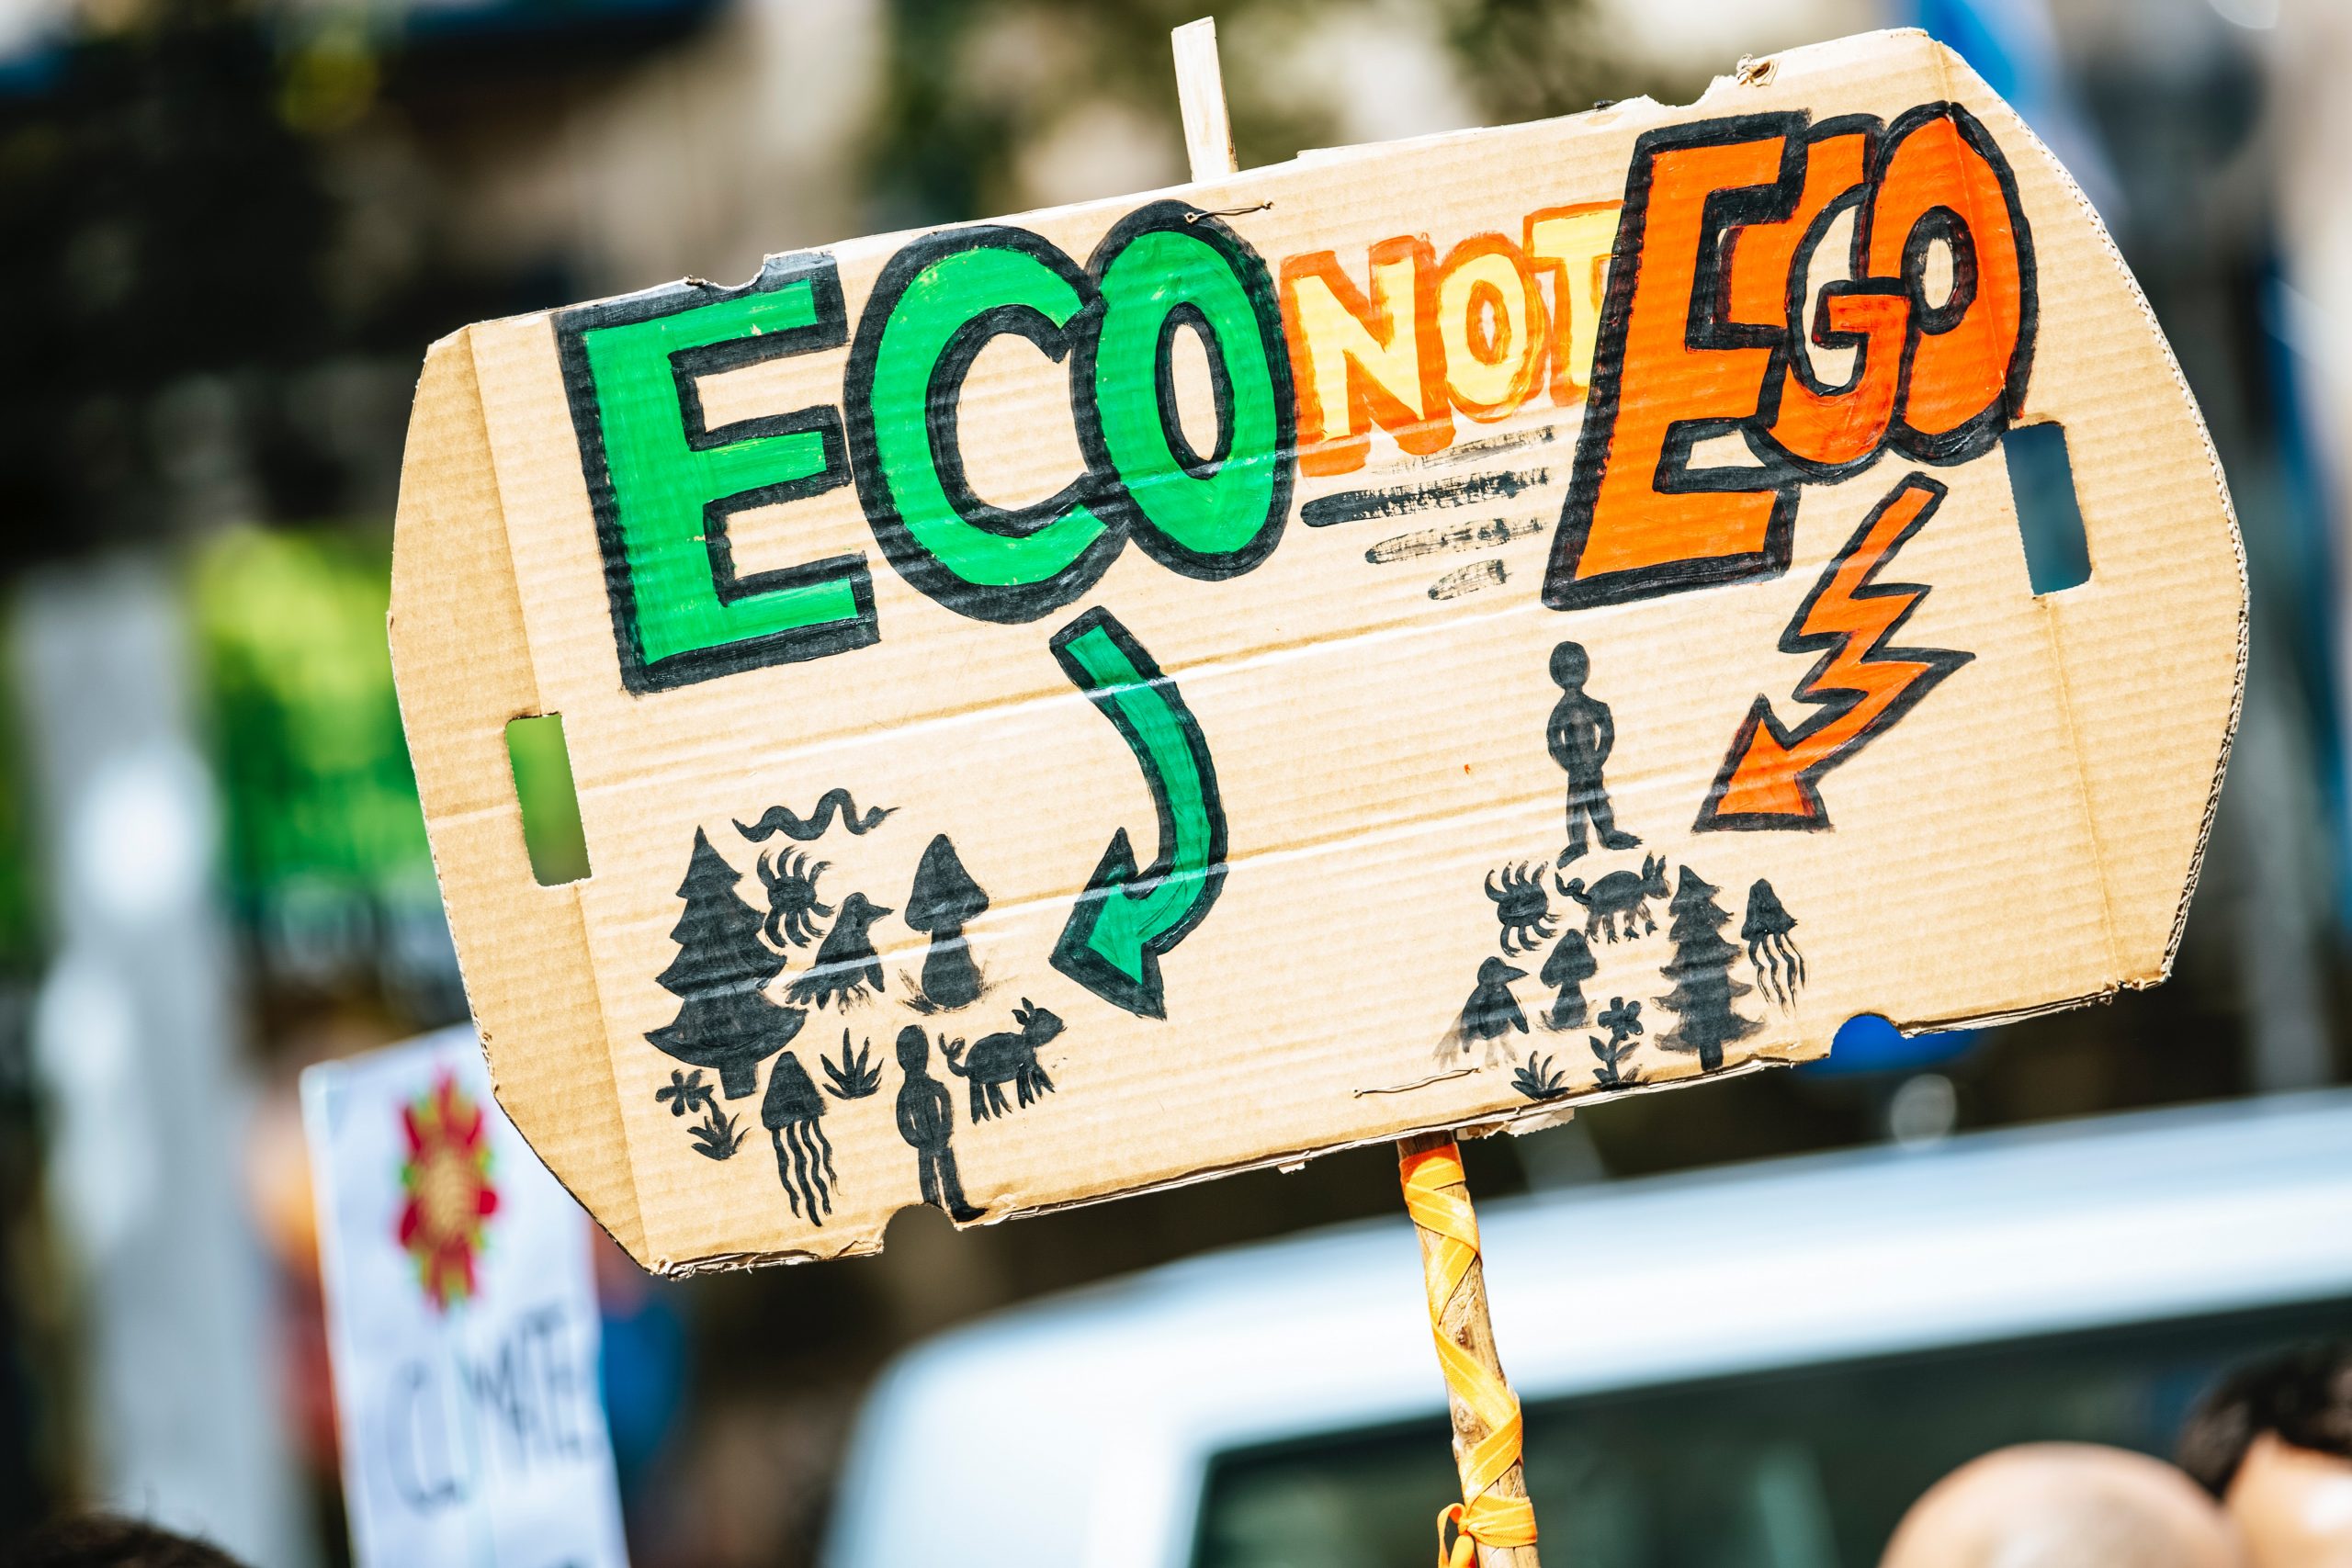 A sign reads "eco no ego" on brown cardboard